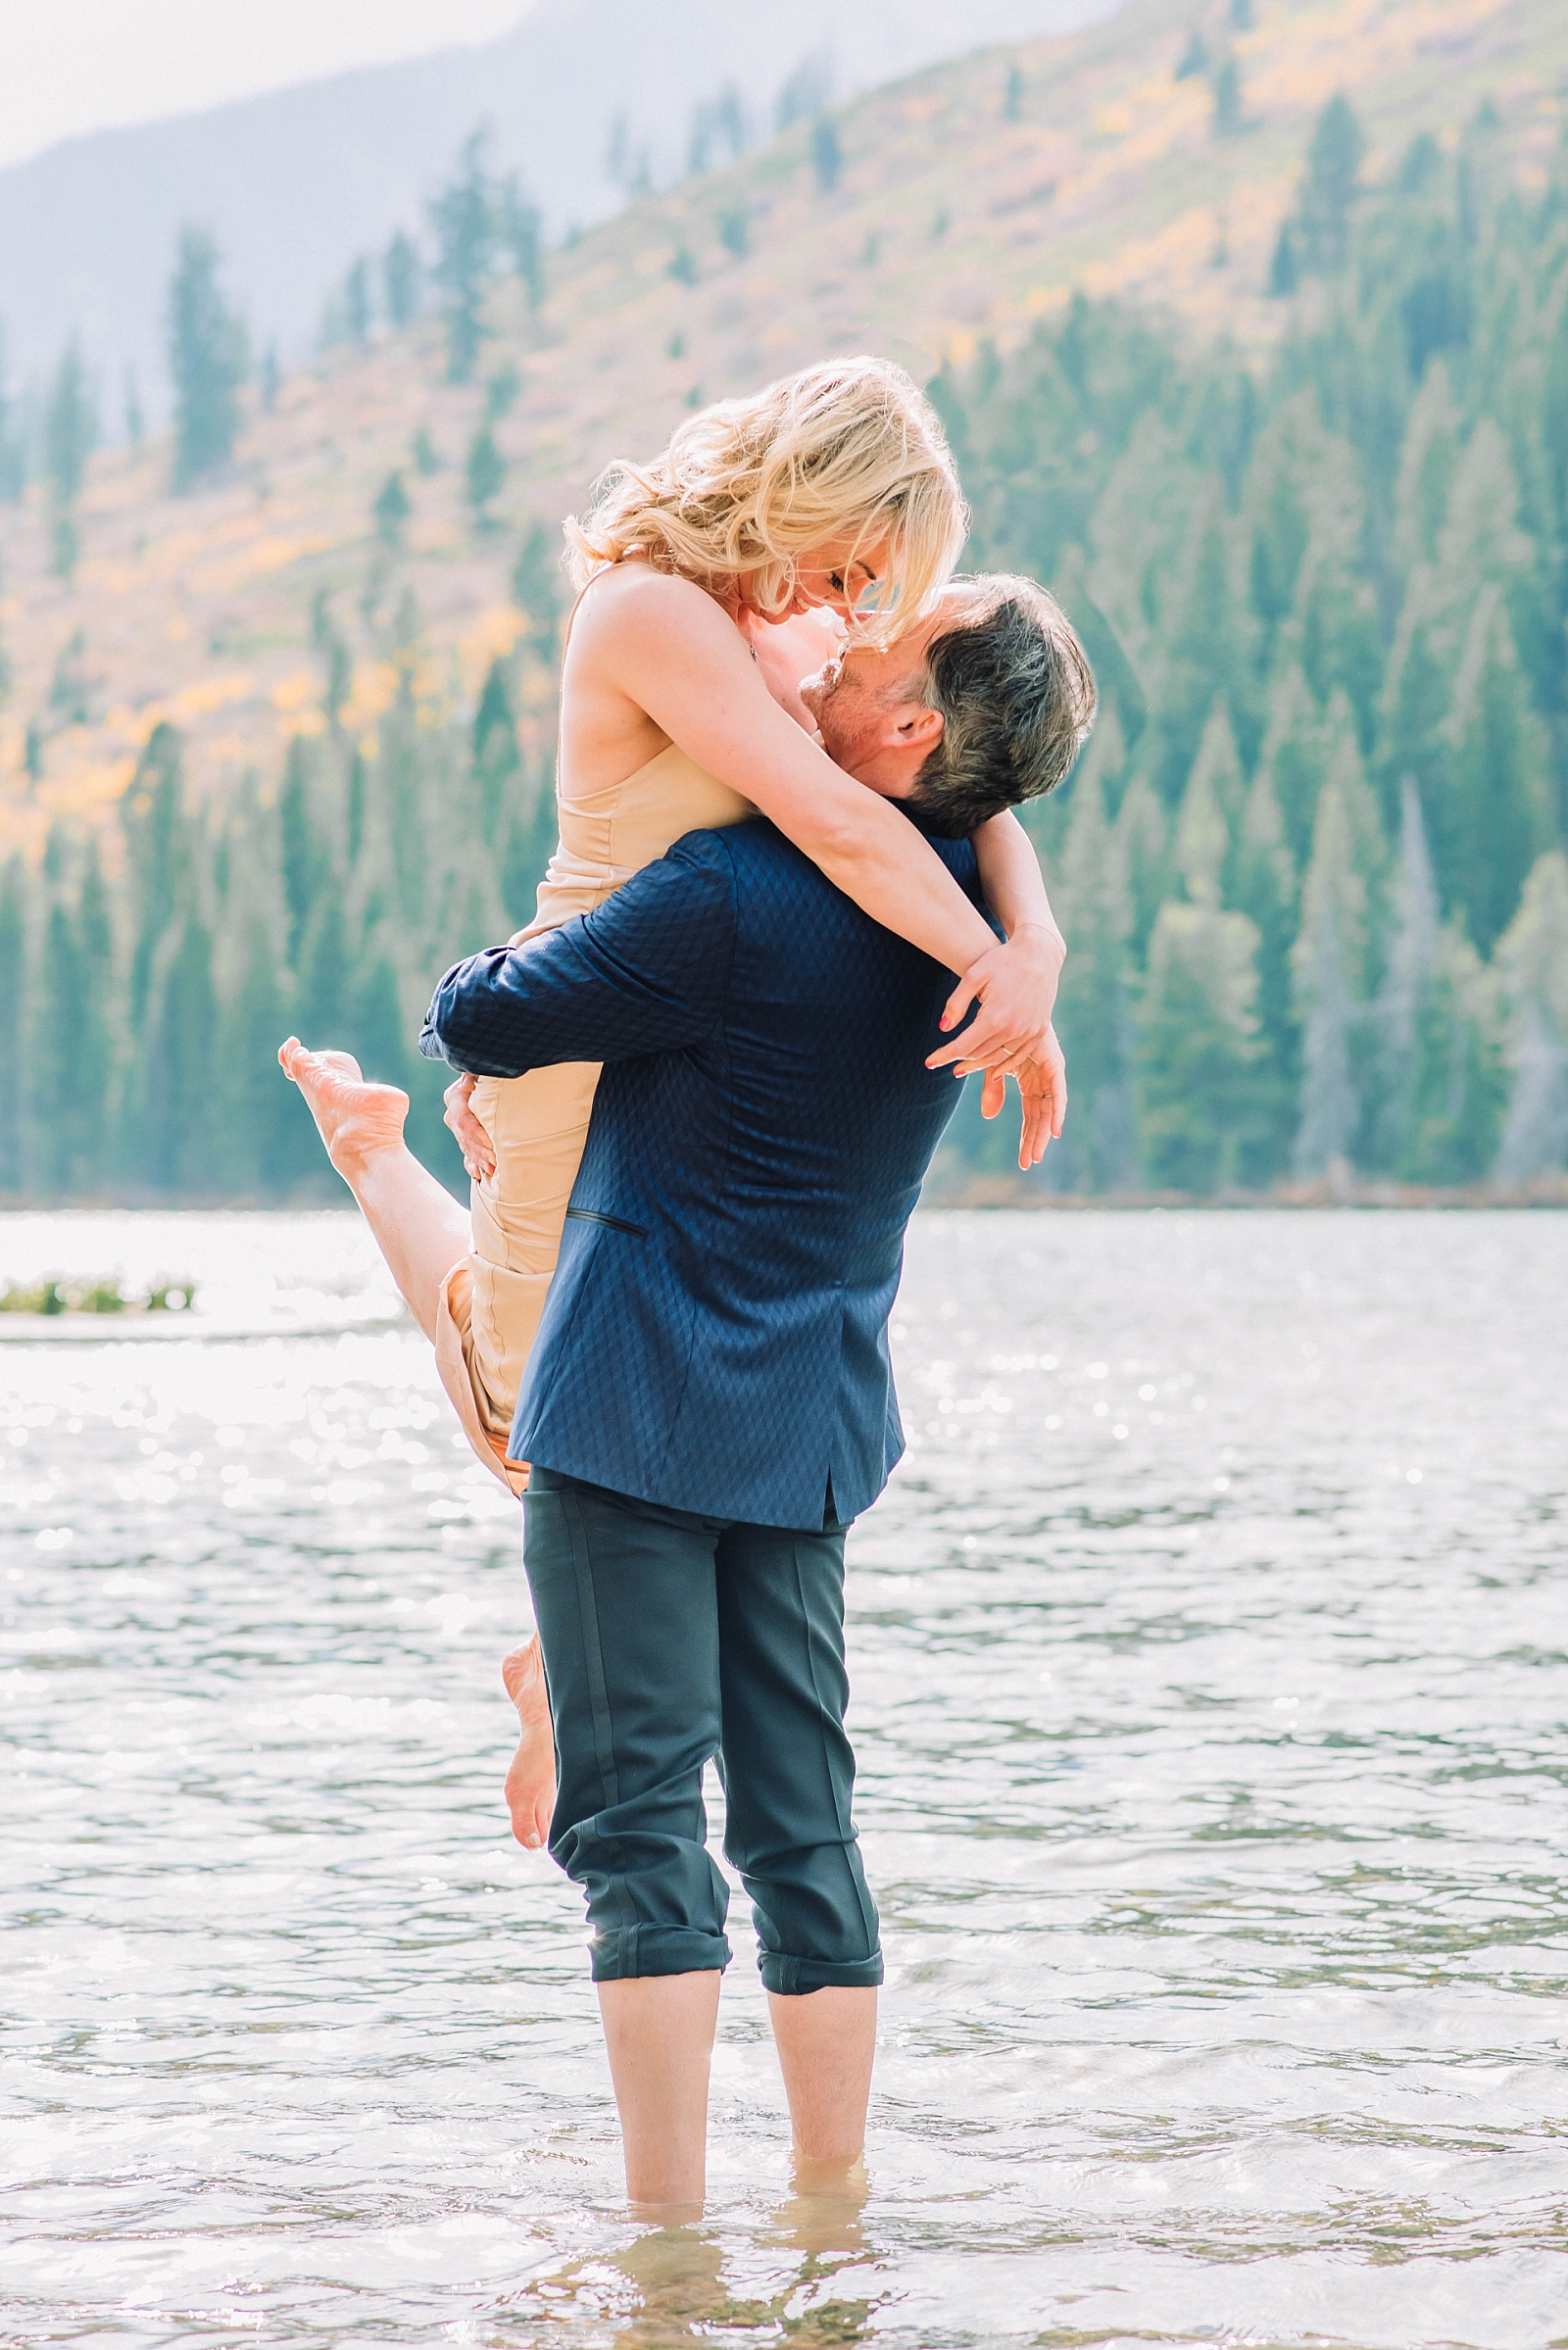 groom picks up his bride as he stands in a lake and she looks down at him and smiling